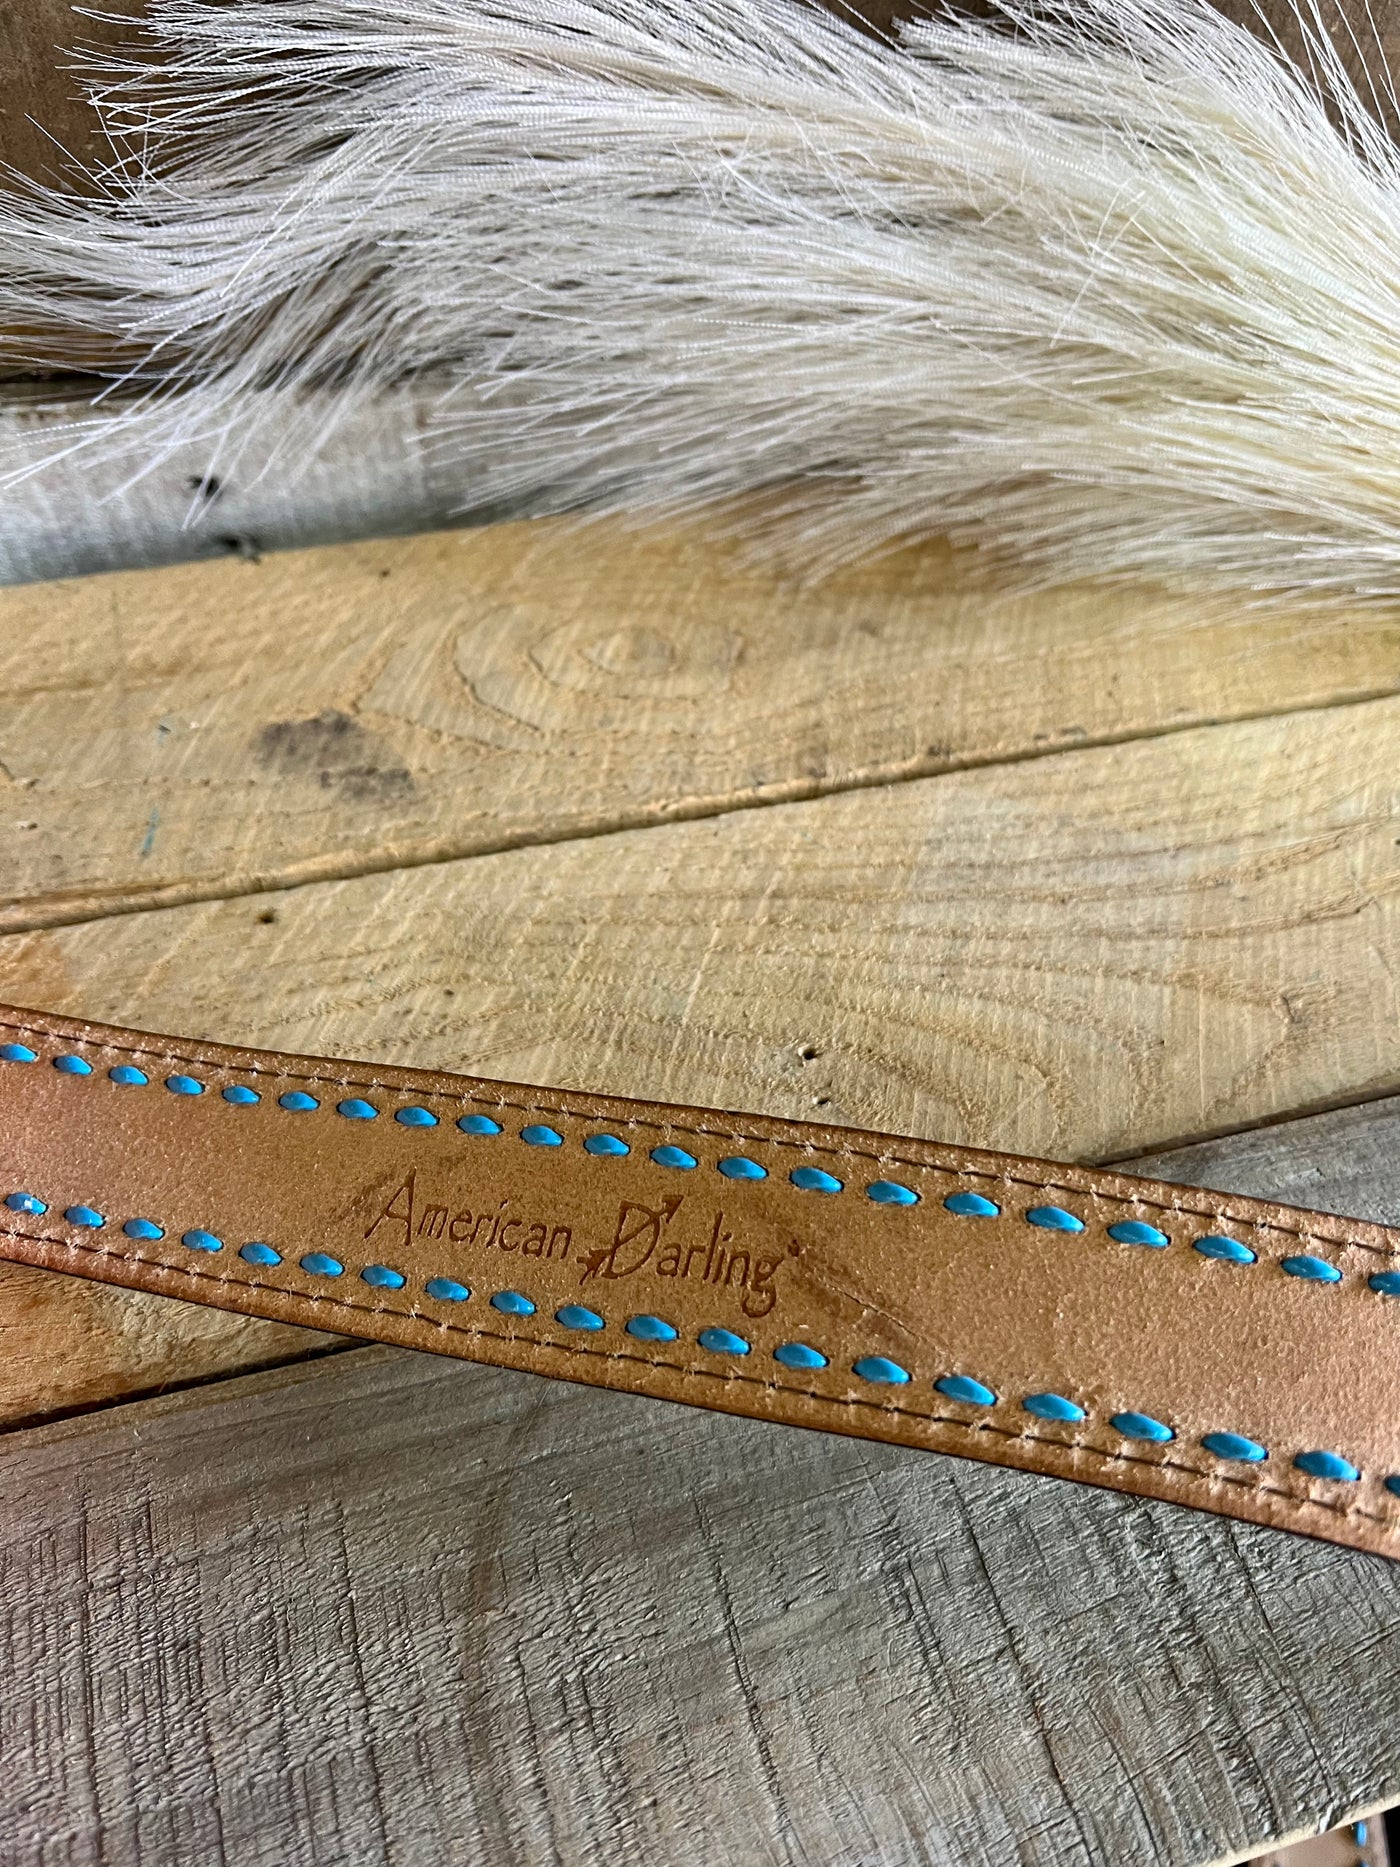 Thumper Tooled Leather Purse Strap